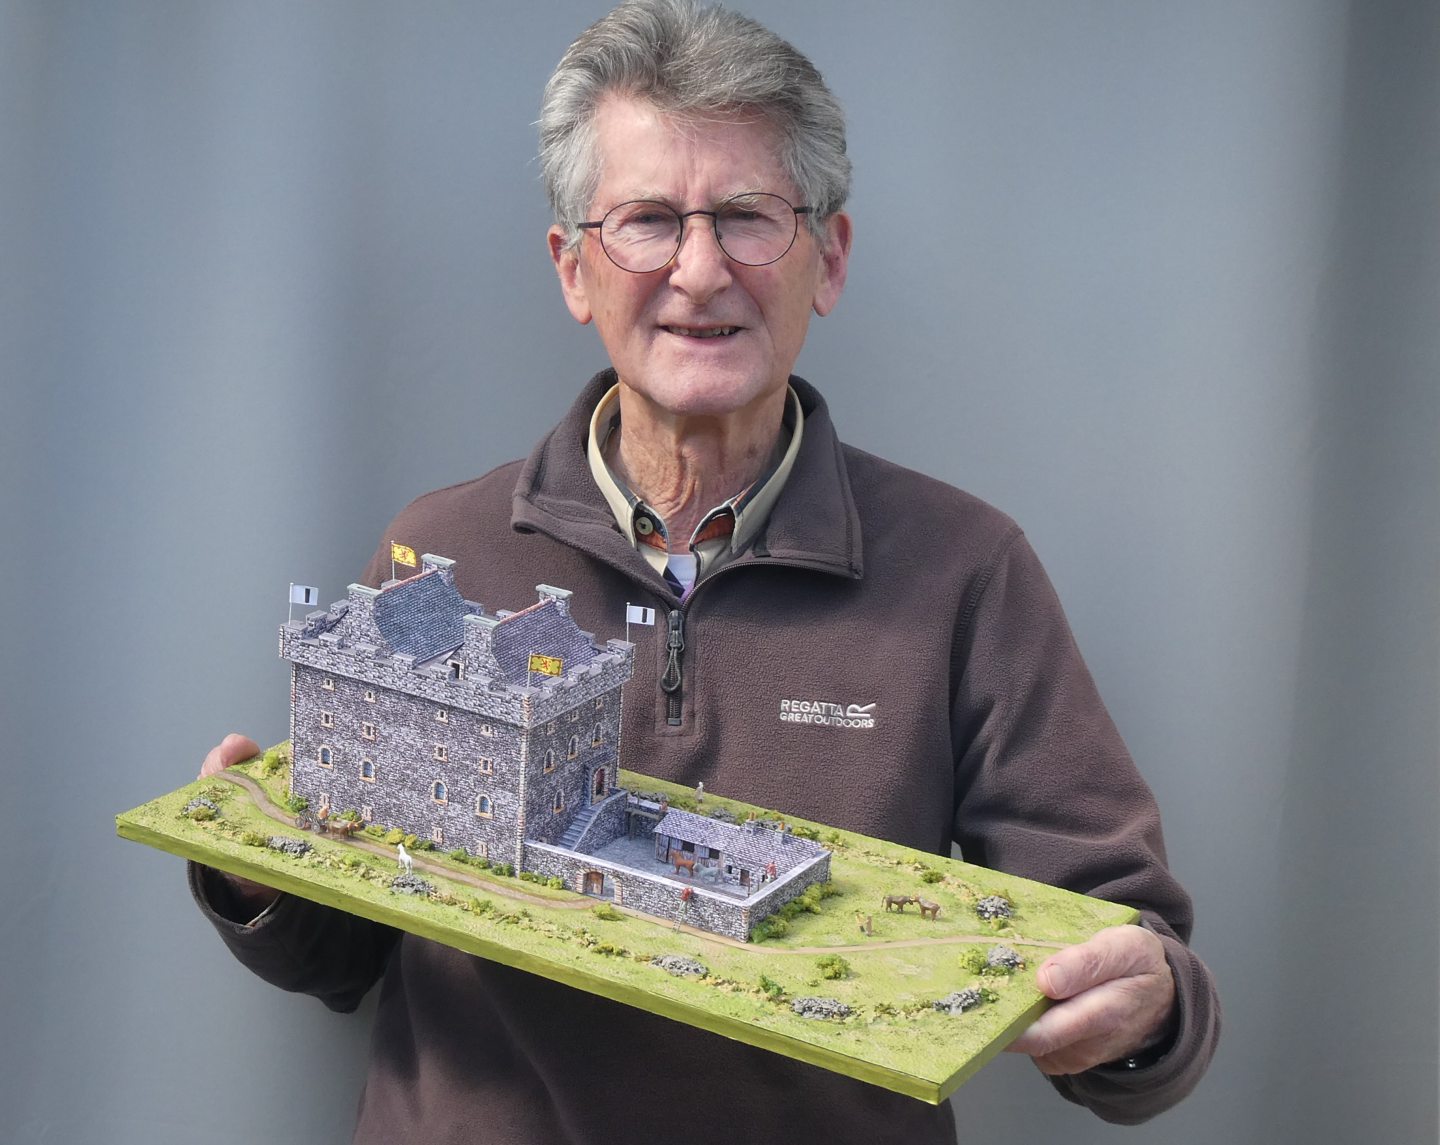 The model of Dunnideer Castle is on 1:150 scale and Artist Clive Metcalfe who made it